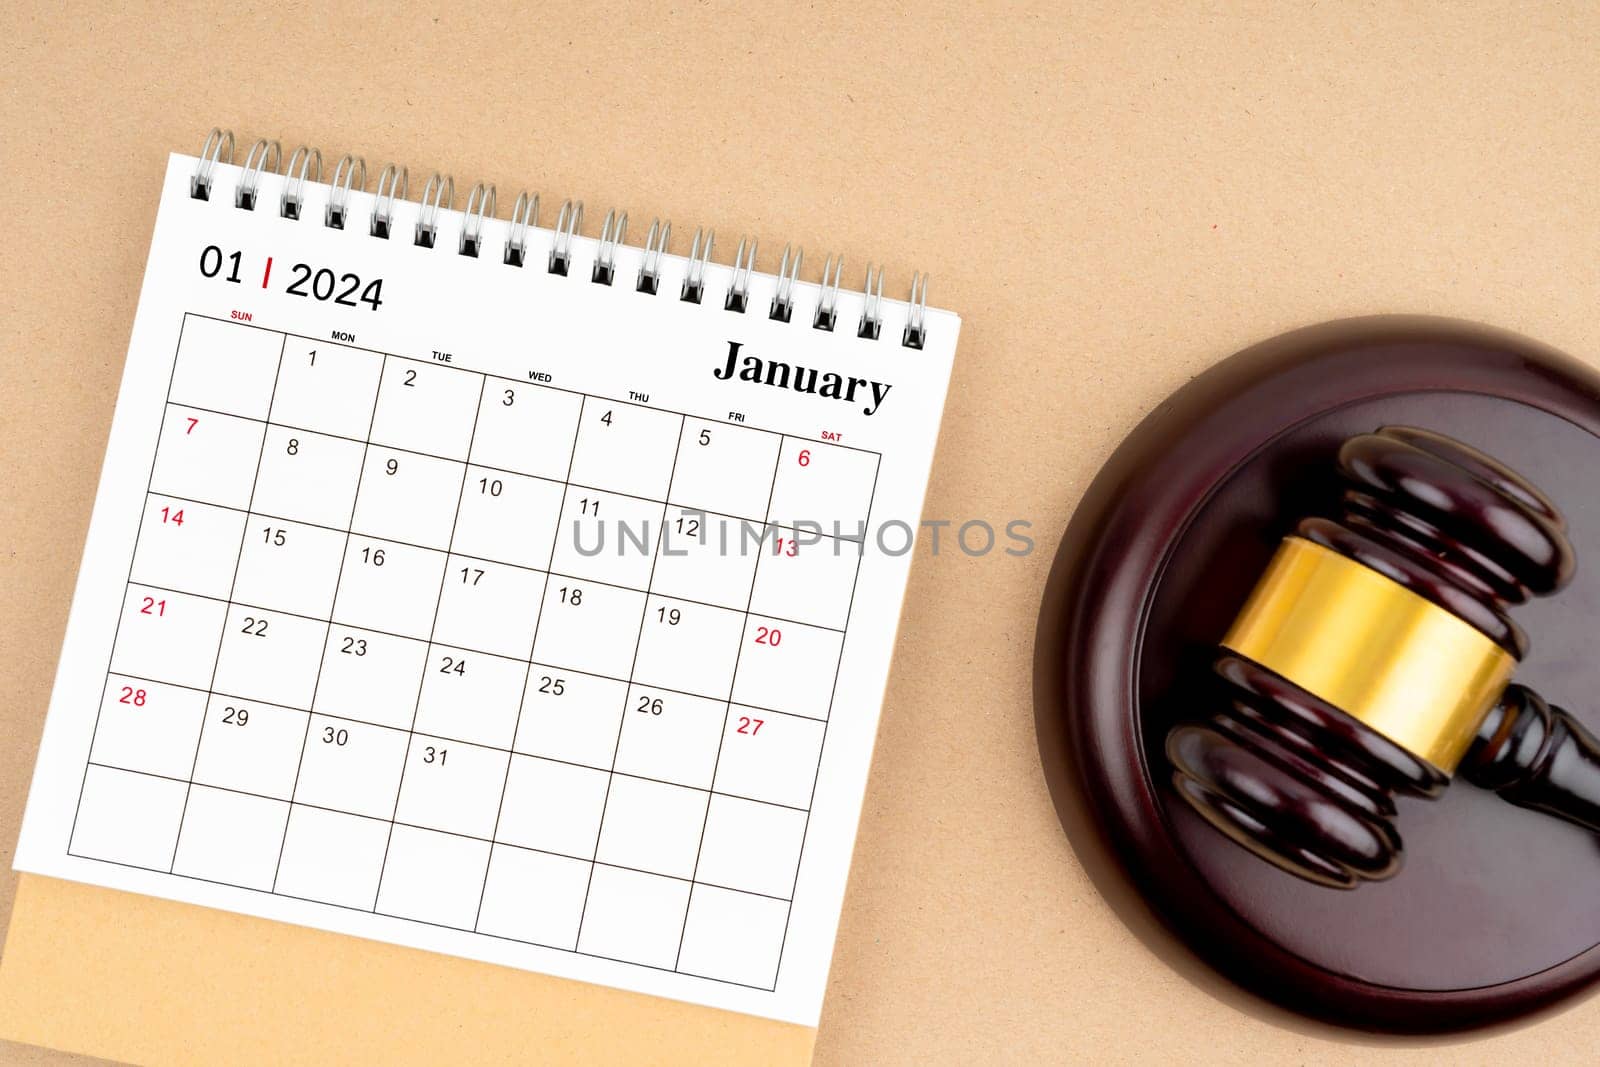 Desk calendar for January 2024 and judge's gavel. by Gamjai